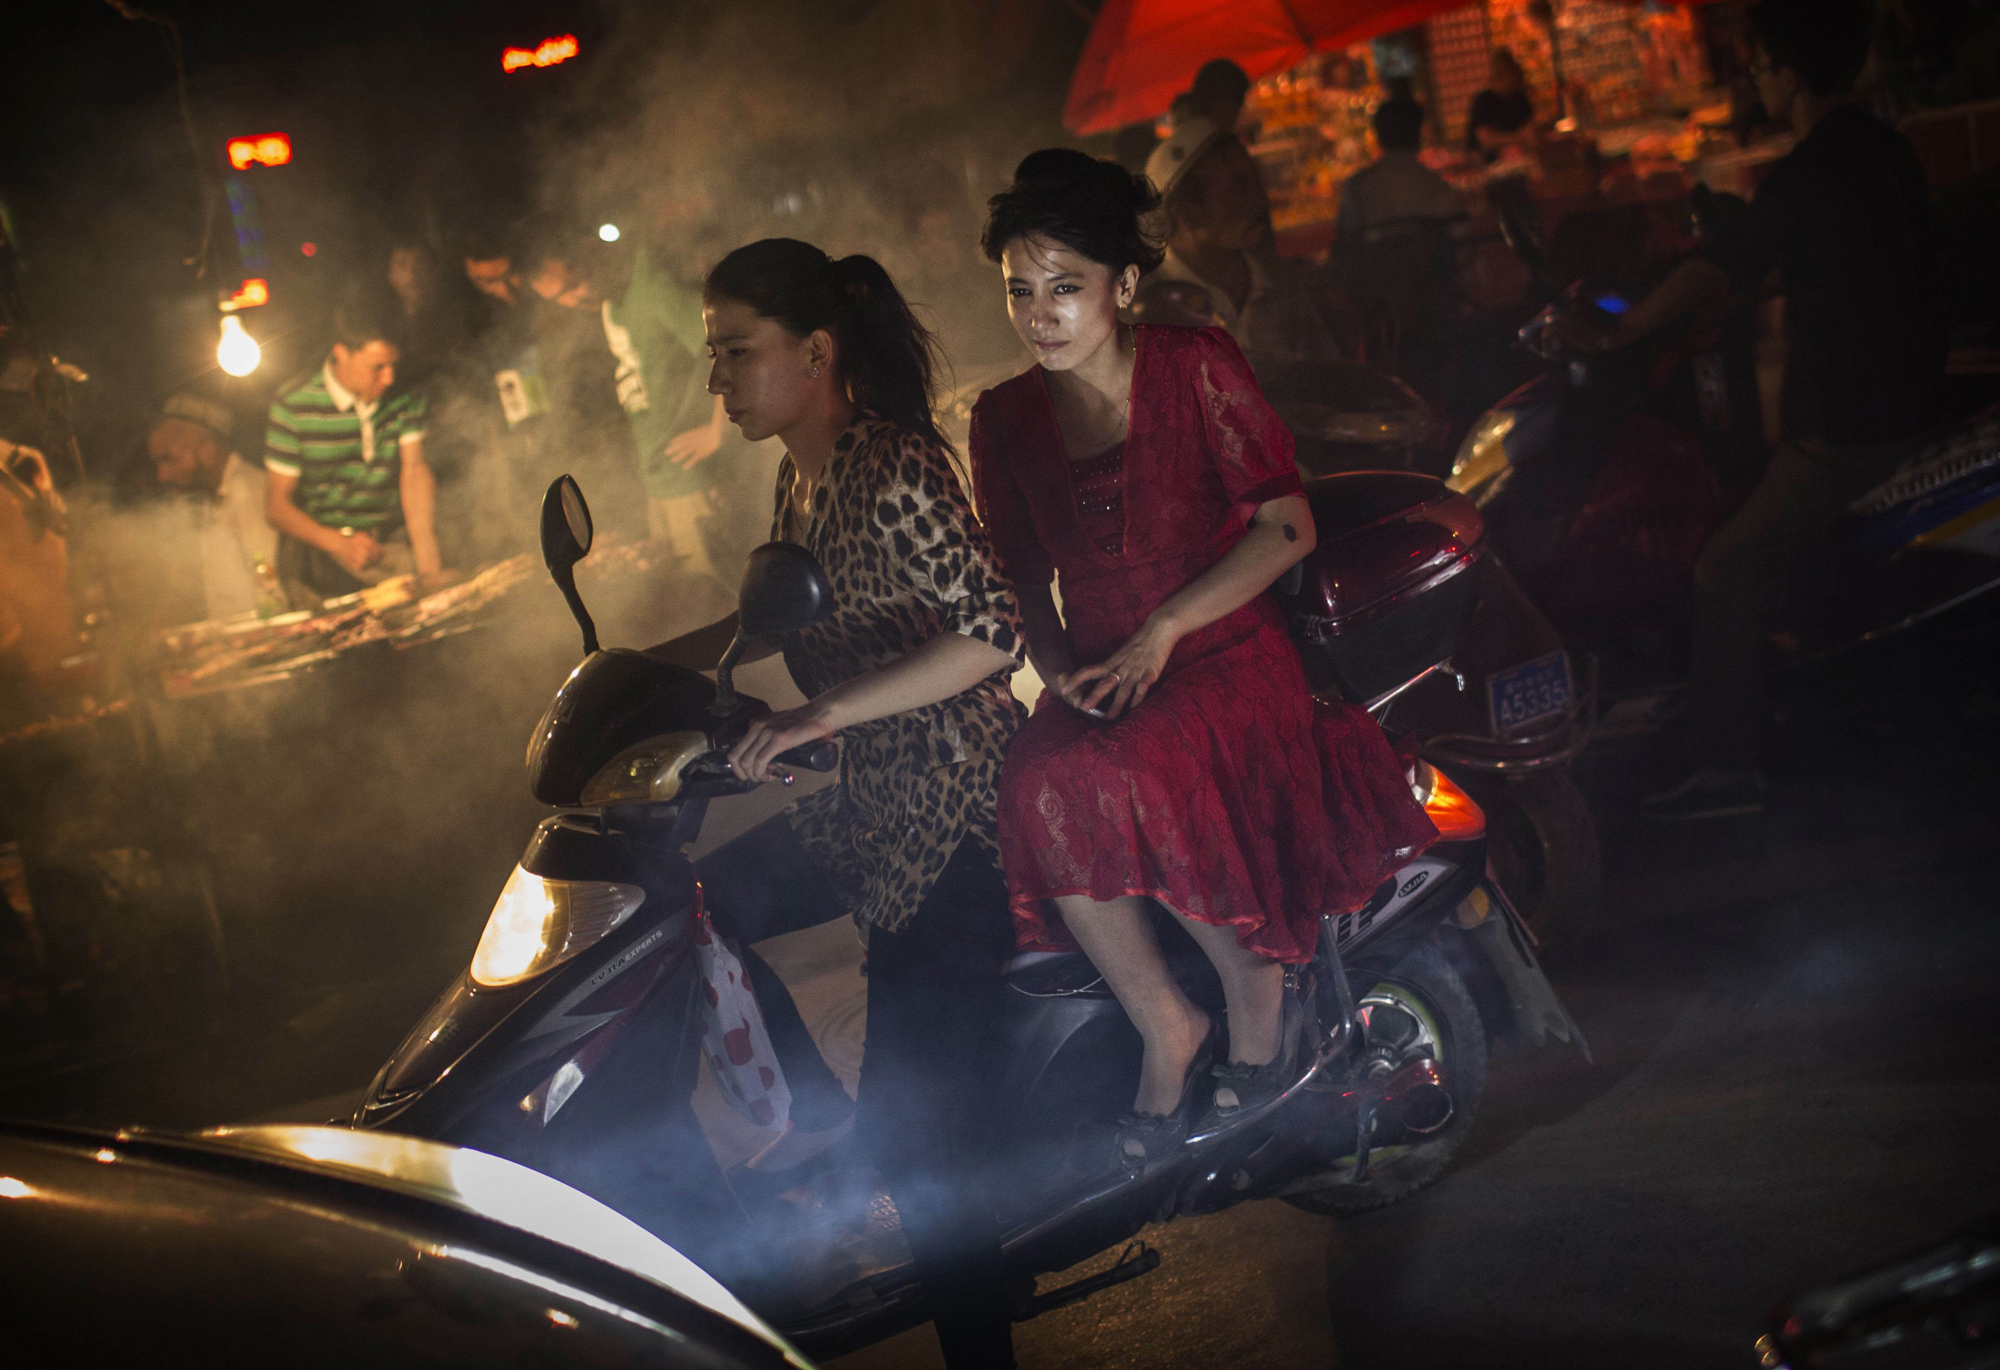 Uyghur women without veils ride on a scooter in a market on July 27, 2014 in old Kashgar.